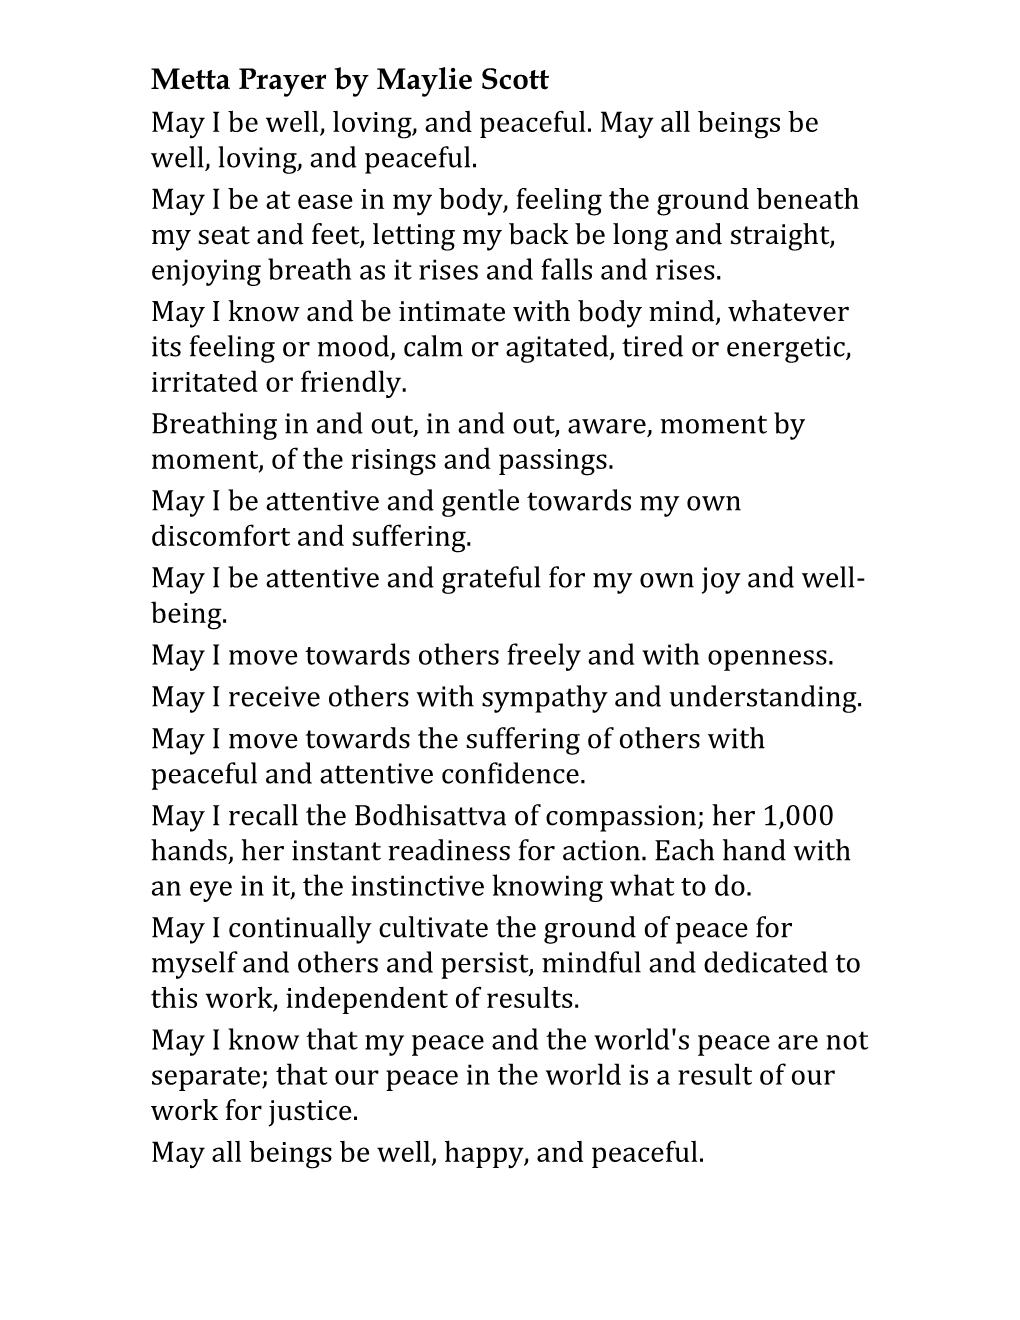 Metta Prayer by Maylie Scott May I Be Well, Loving, and Peaceful. May All Beings Be Well, Loving, and Peaceful